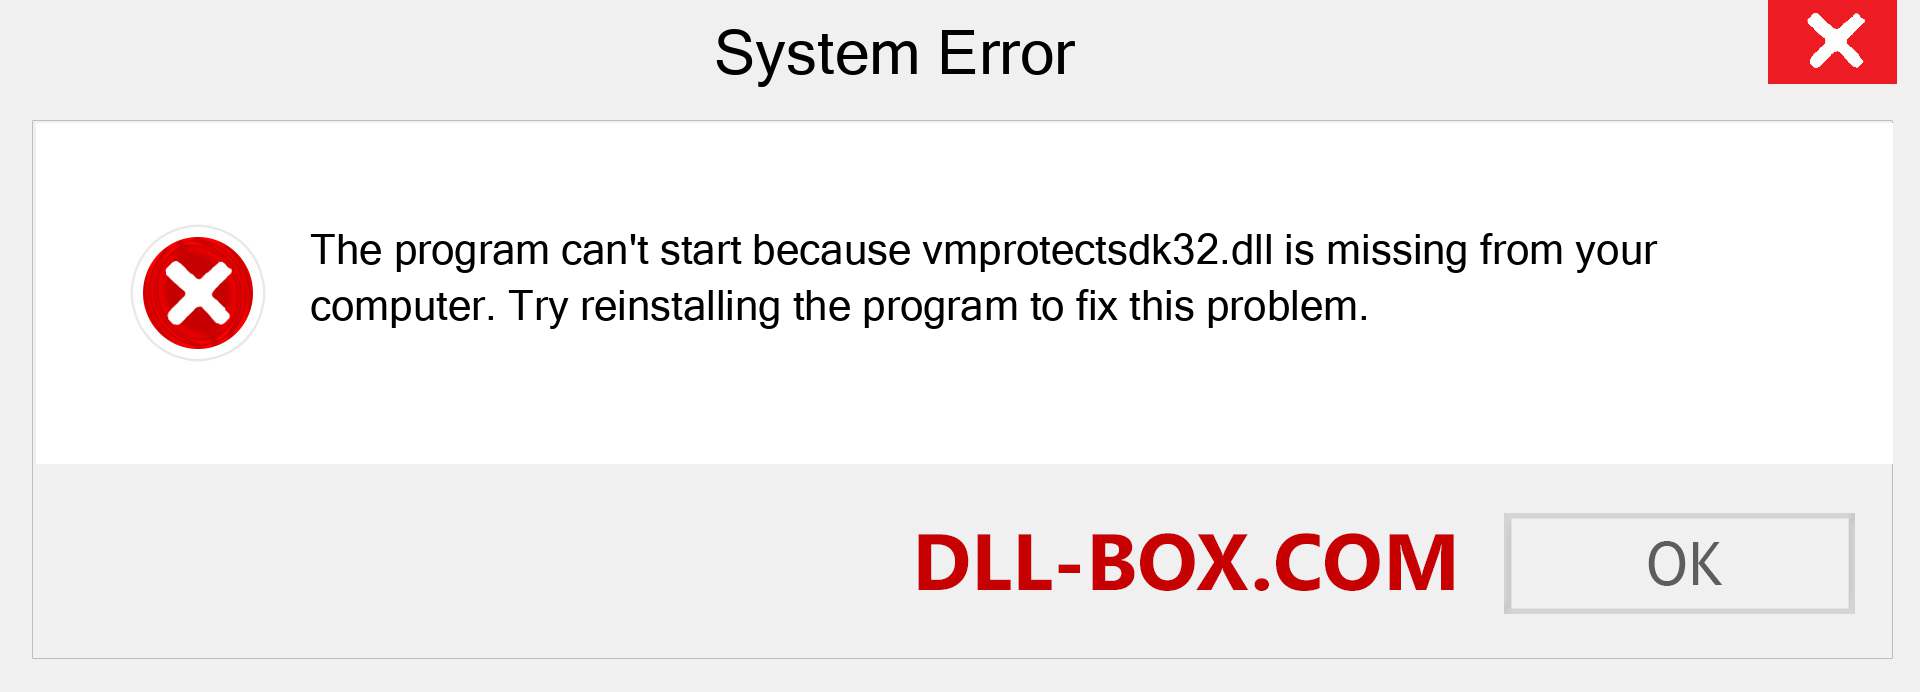  vmprotectsdk32.dll file is missing?. Download for Windows 7, 8, 10 - Fix  vmprotectsdk32 dll Missing Error on Windows, photos, images